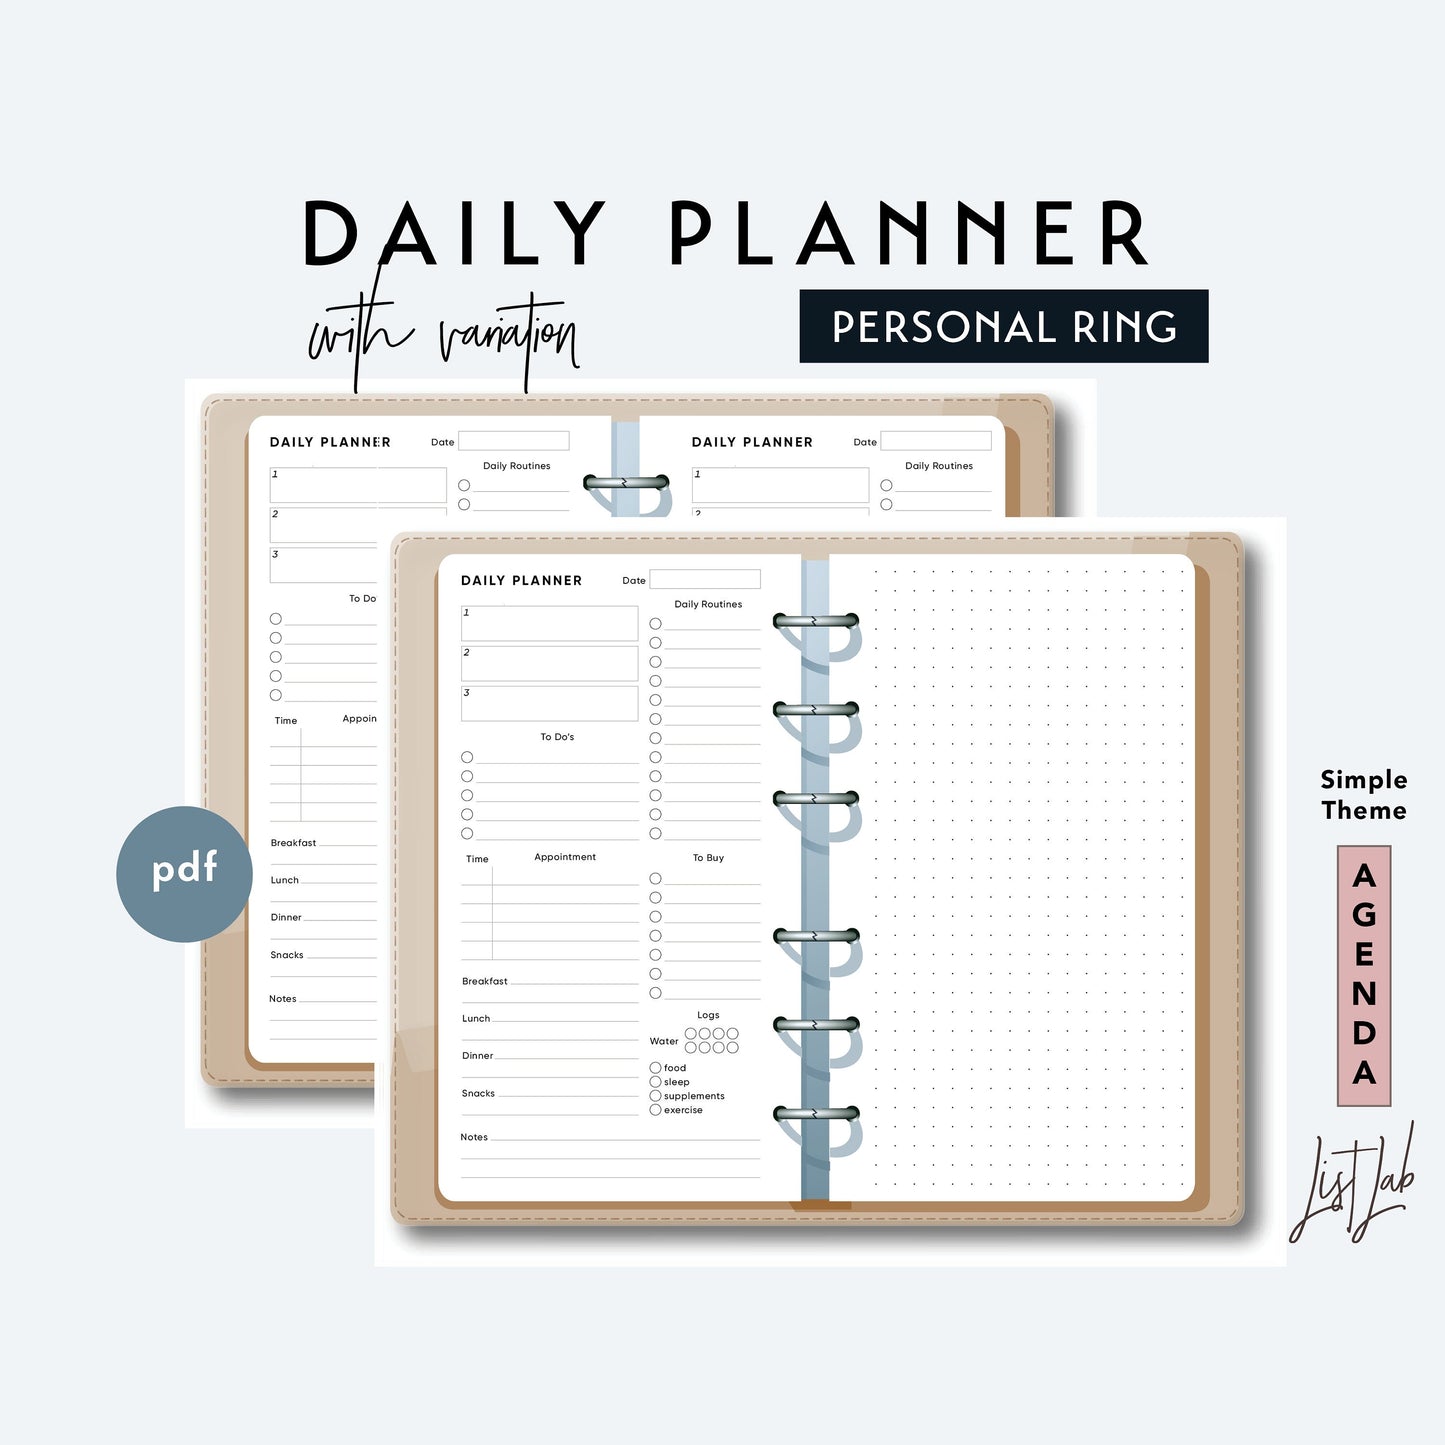 Personal Ring DAILY PLANNER Printable Insert Set